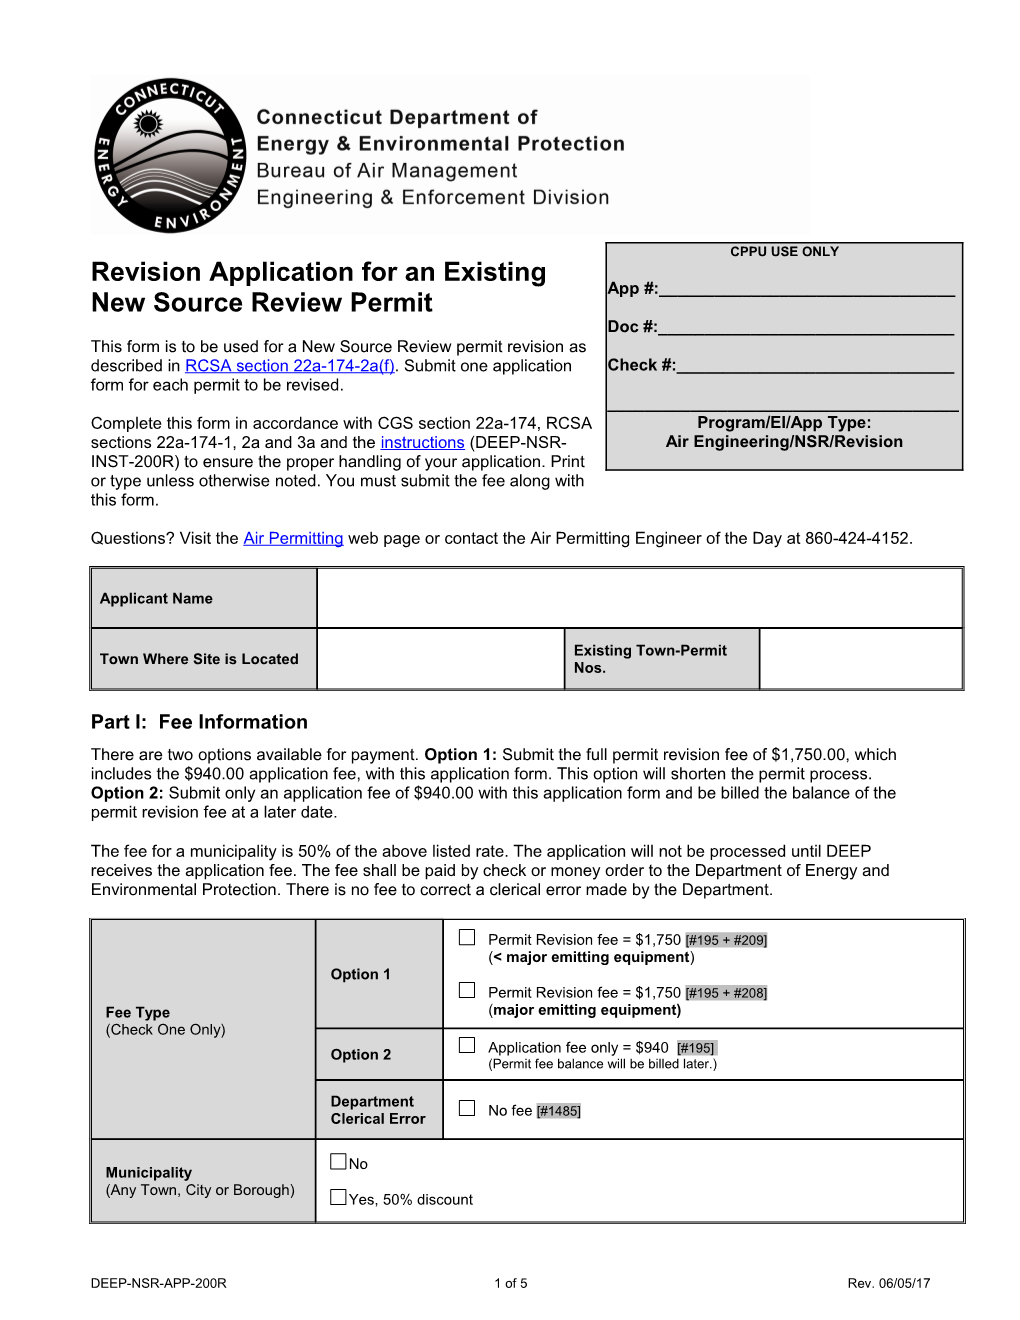 Revision Application for an Existing New Source Review Permit